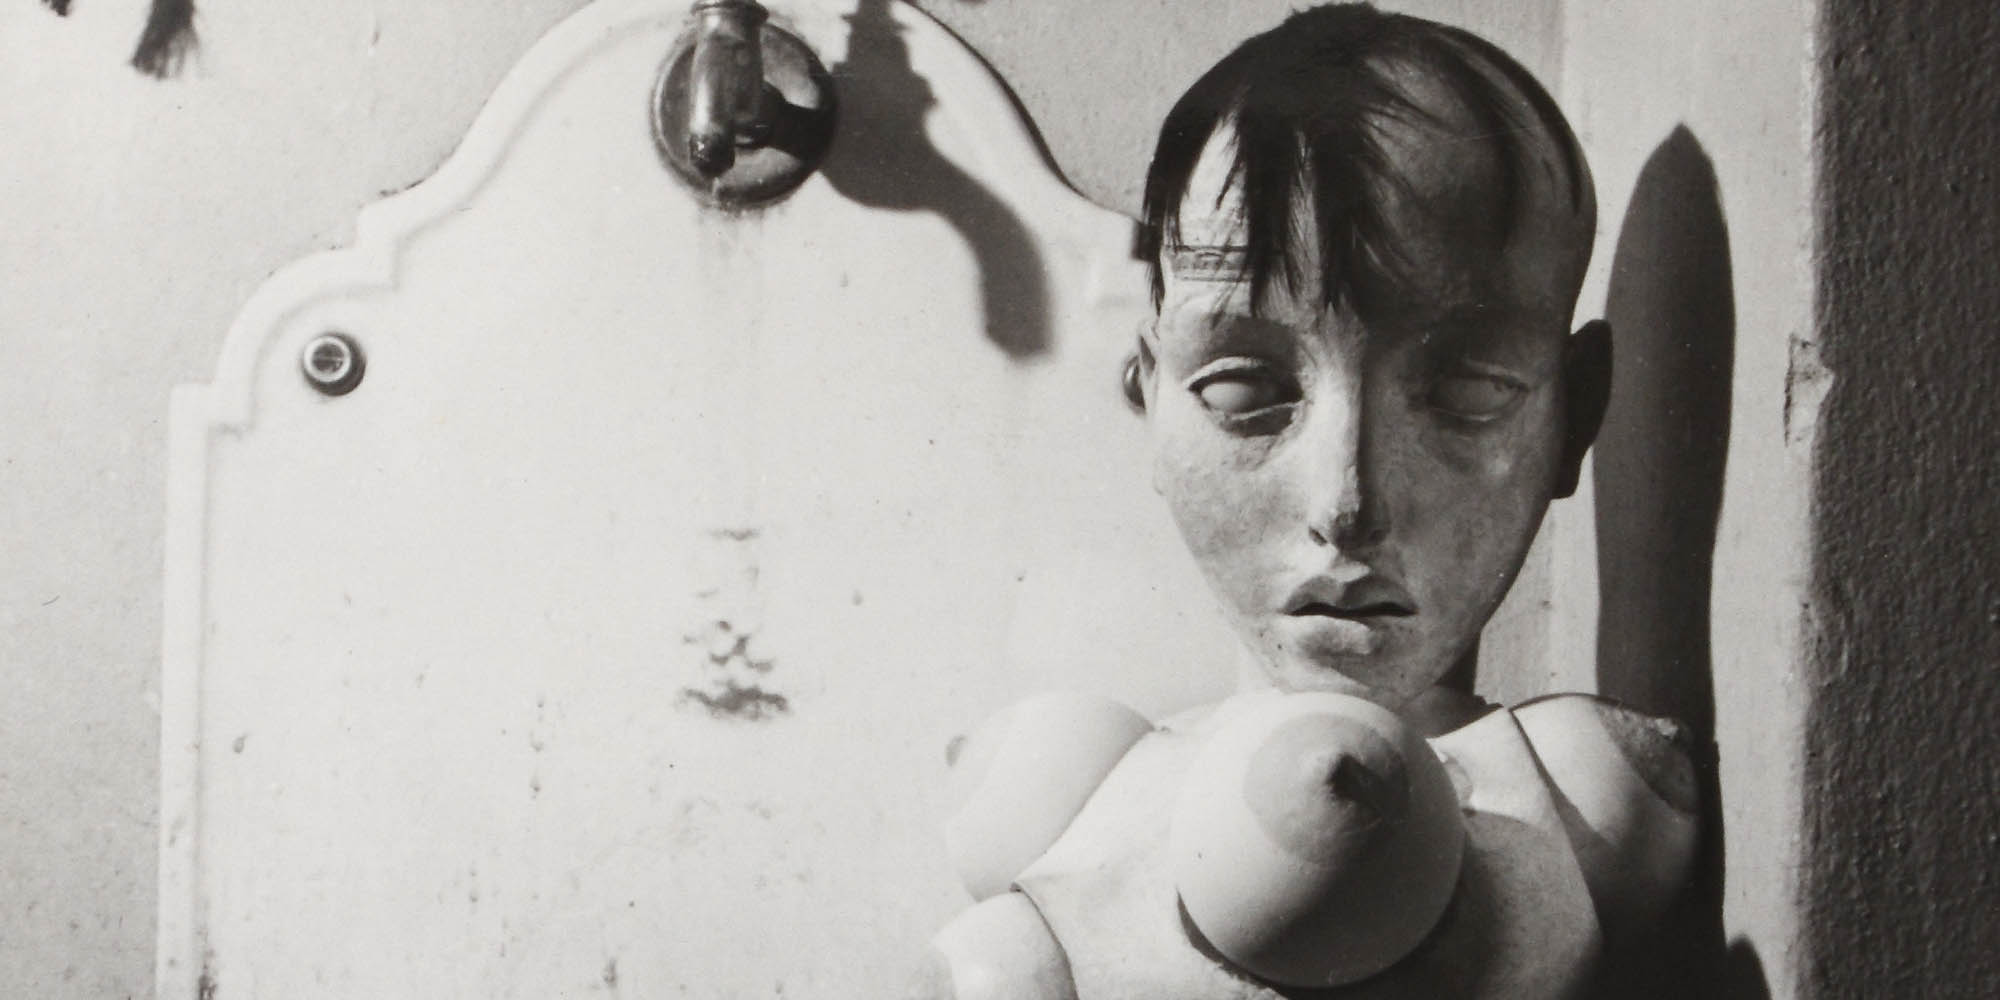 A banner showing a photograph of a sculpture or mannequin, which is a head with dark hair connect to a base with breast like objects attached to it. The doll is next to a wall, balanced on a sink with a spout at its top.